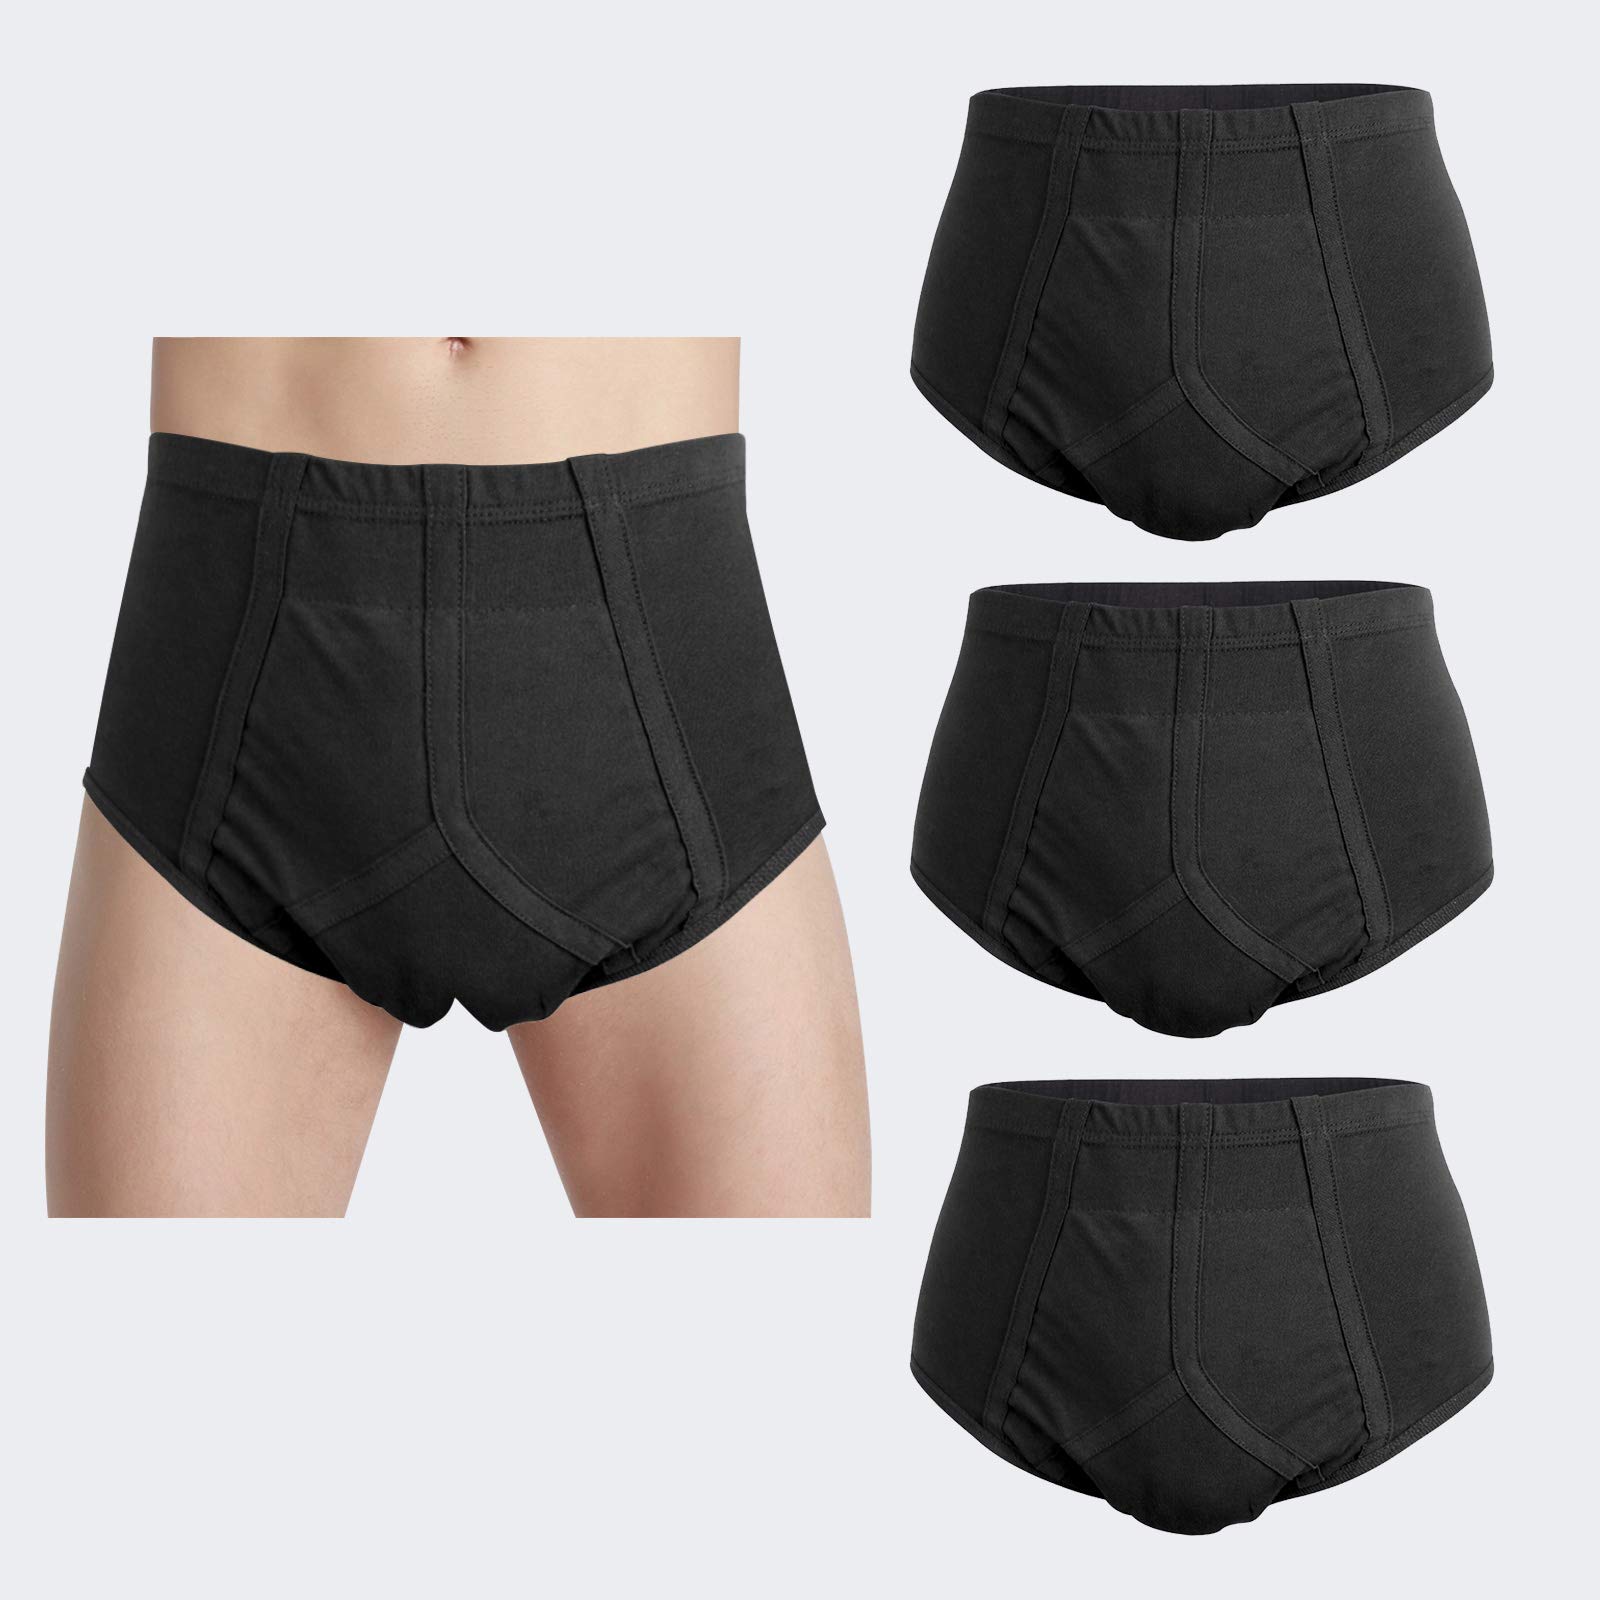 Men's Incontinence Underwear- Bladder Control Briefs Washable Urinary  Underwear for Men I Cotton Incontinence Briefs with Front Absorption Area I  Incontinence Boxer Briefs